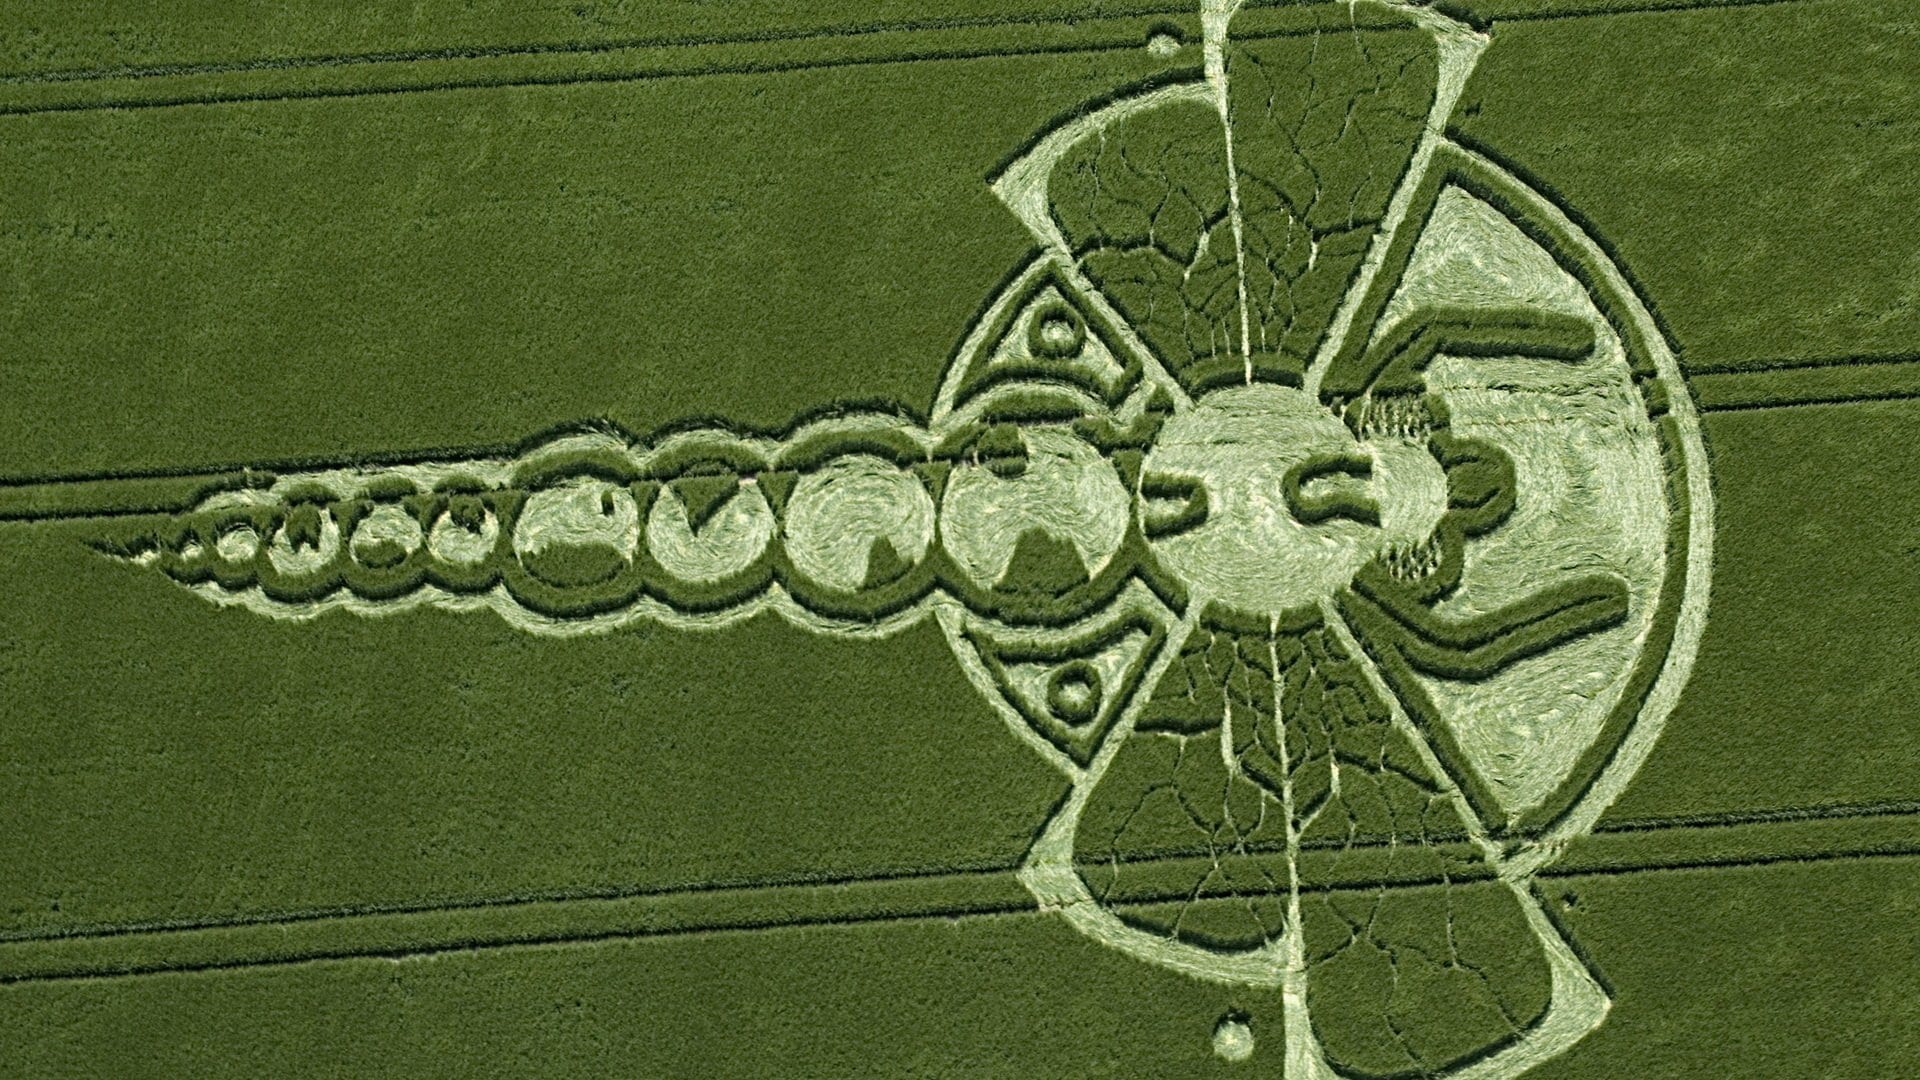 Dragonfly crop circle ufo mystery alien nature hyperspace dragon